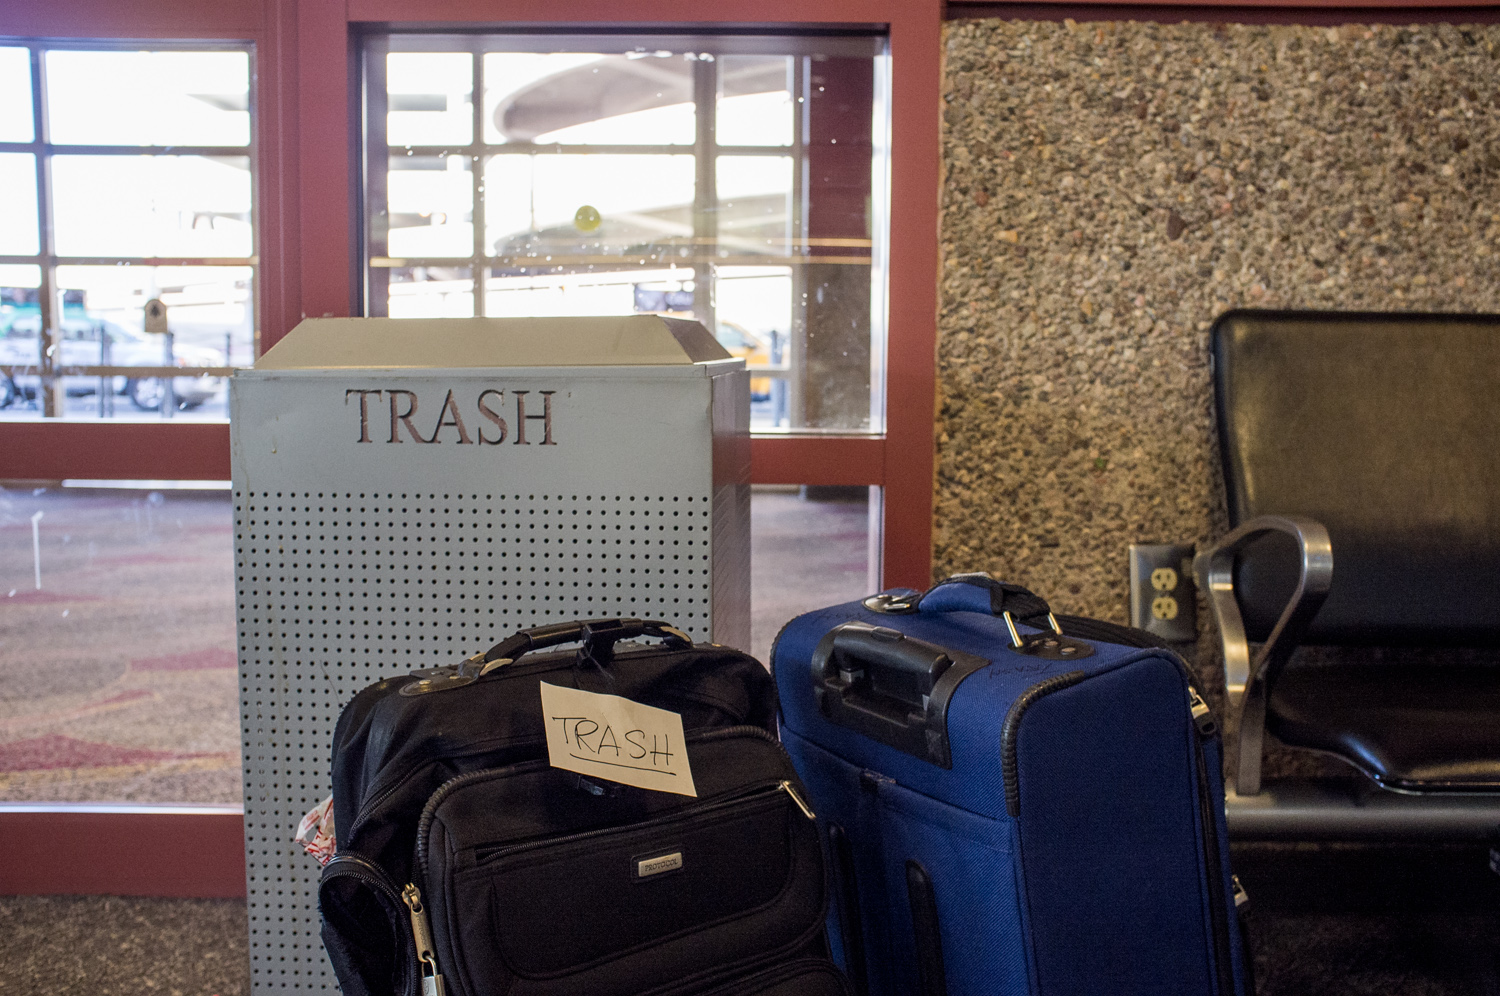  Where does the trash go? In the trash or in the trash? Or is the suitcase trash? 